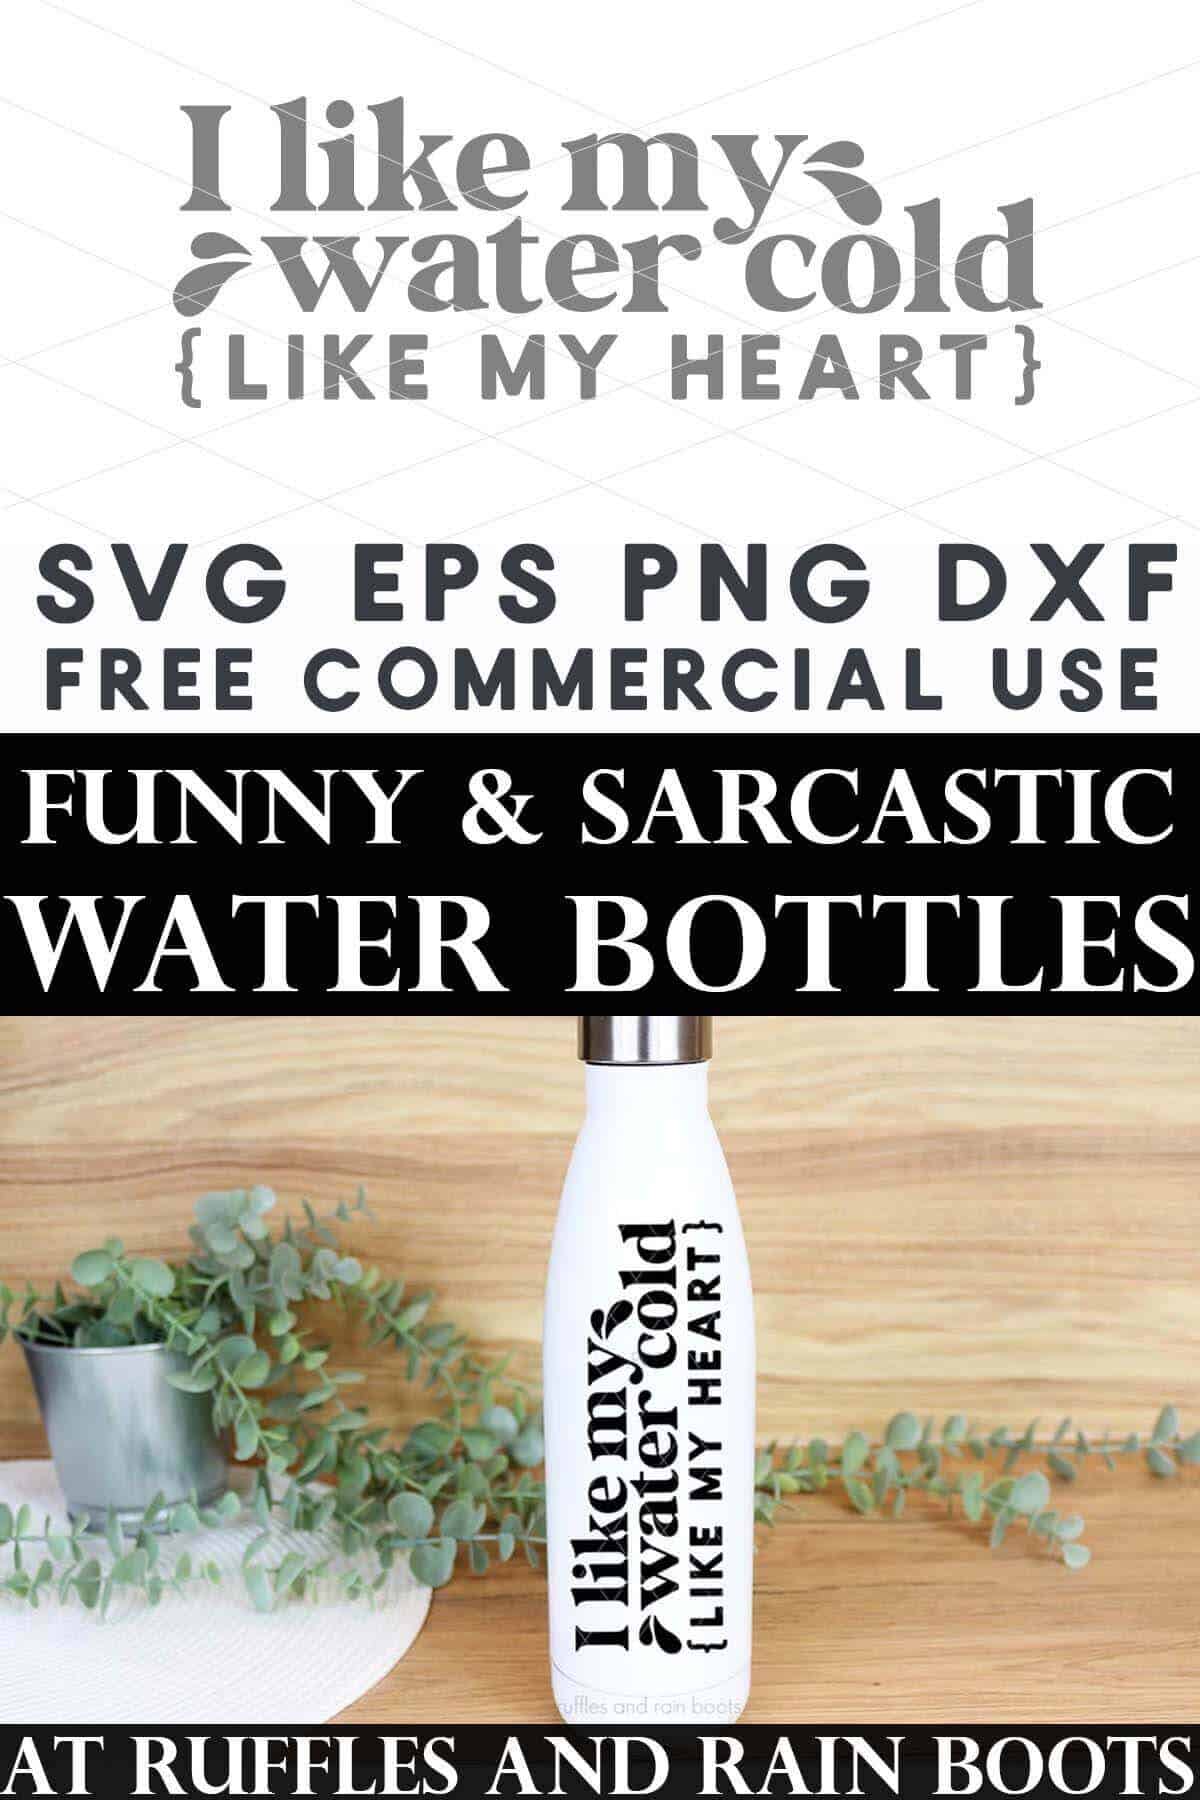 Split vertical image showing white water bottle with silver cap against wood background with I like my water cold like my heart design in black vinyl.